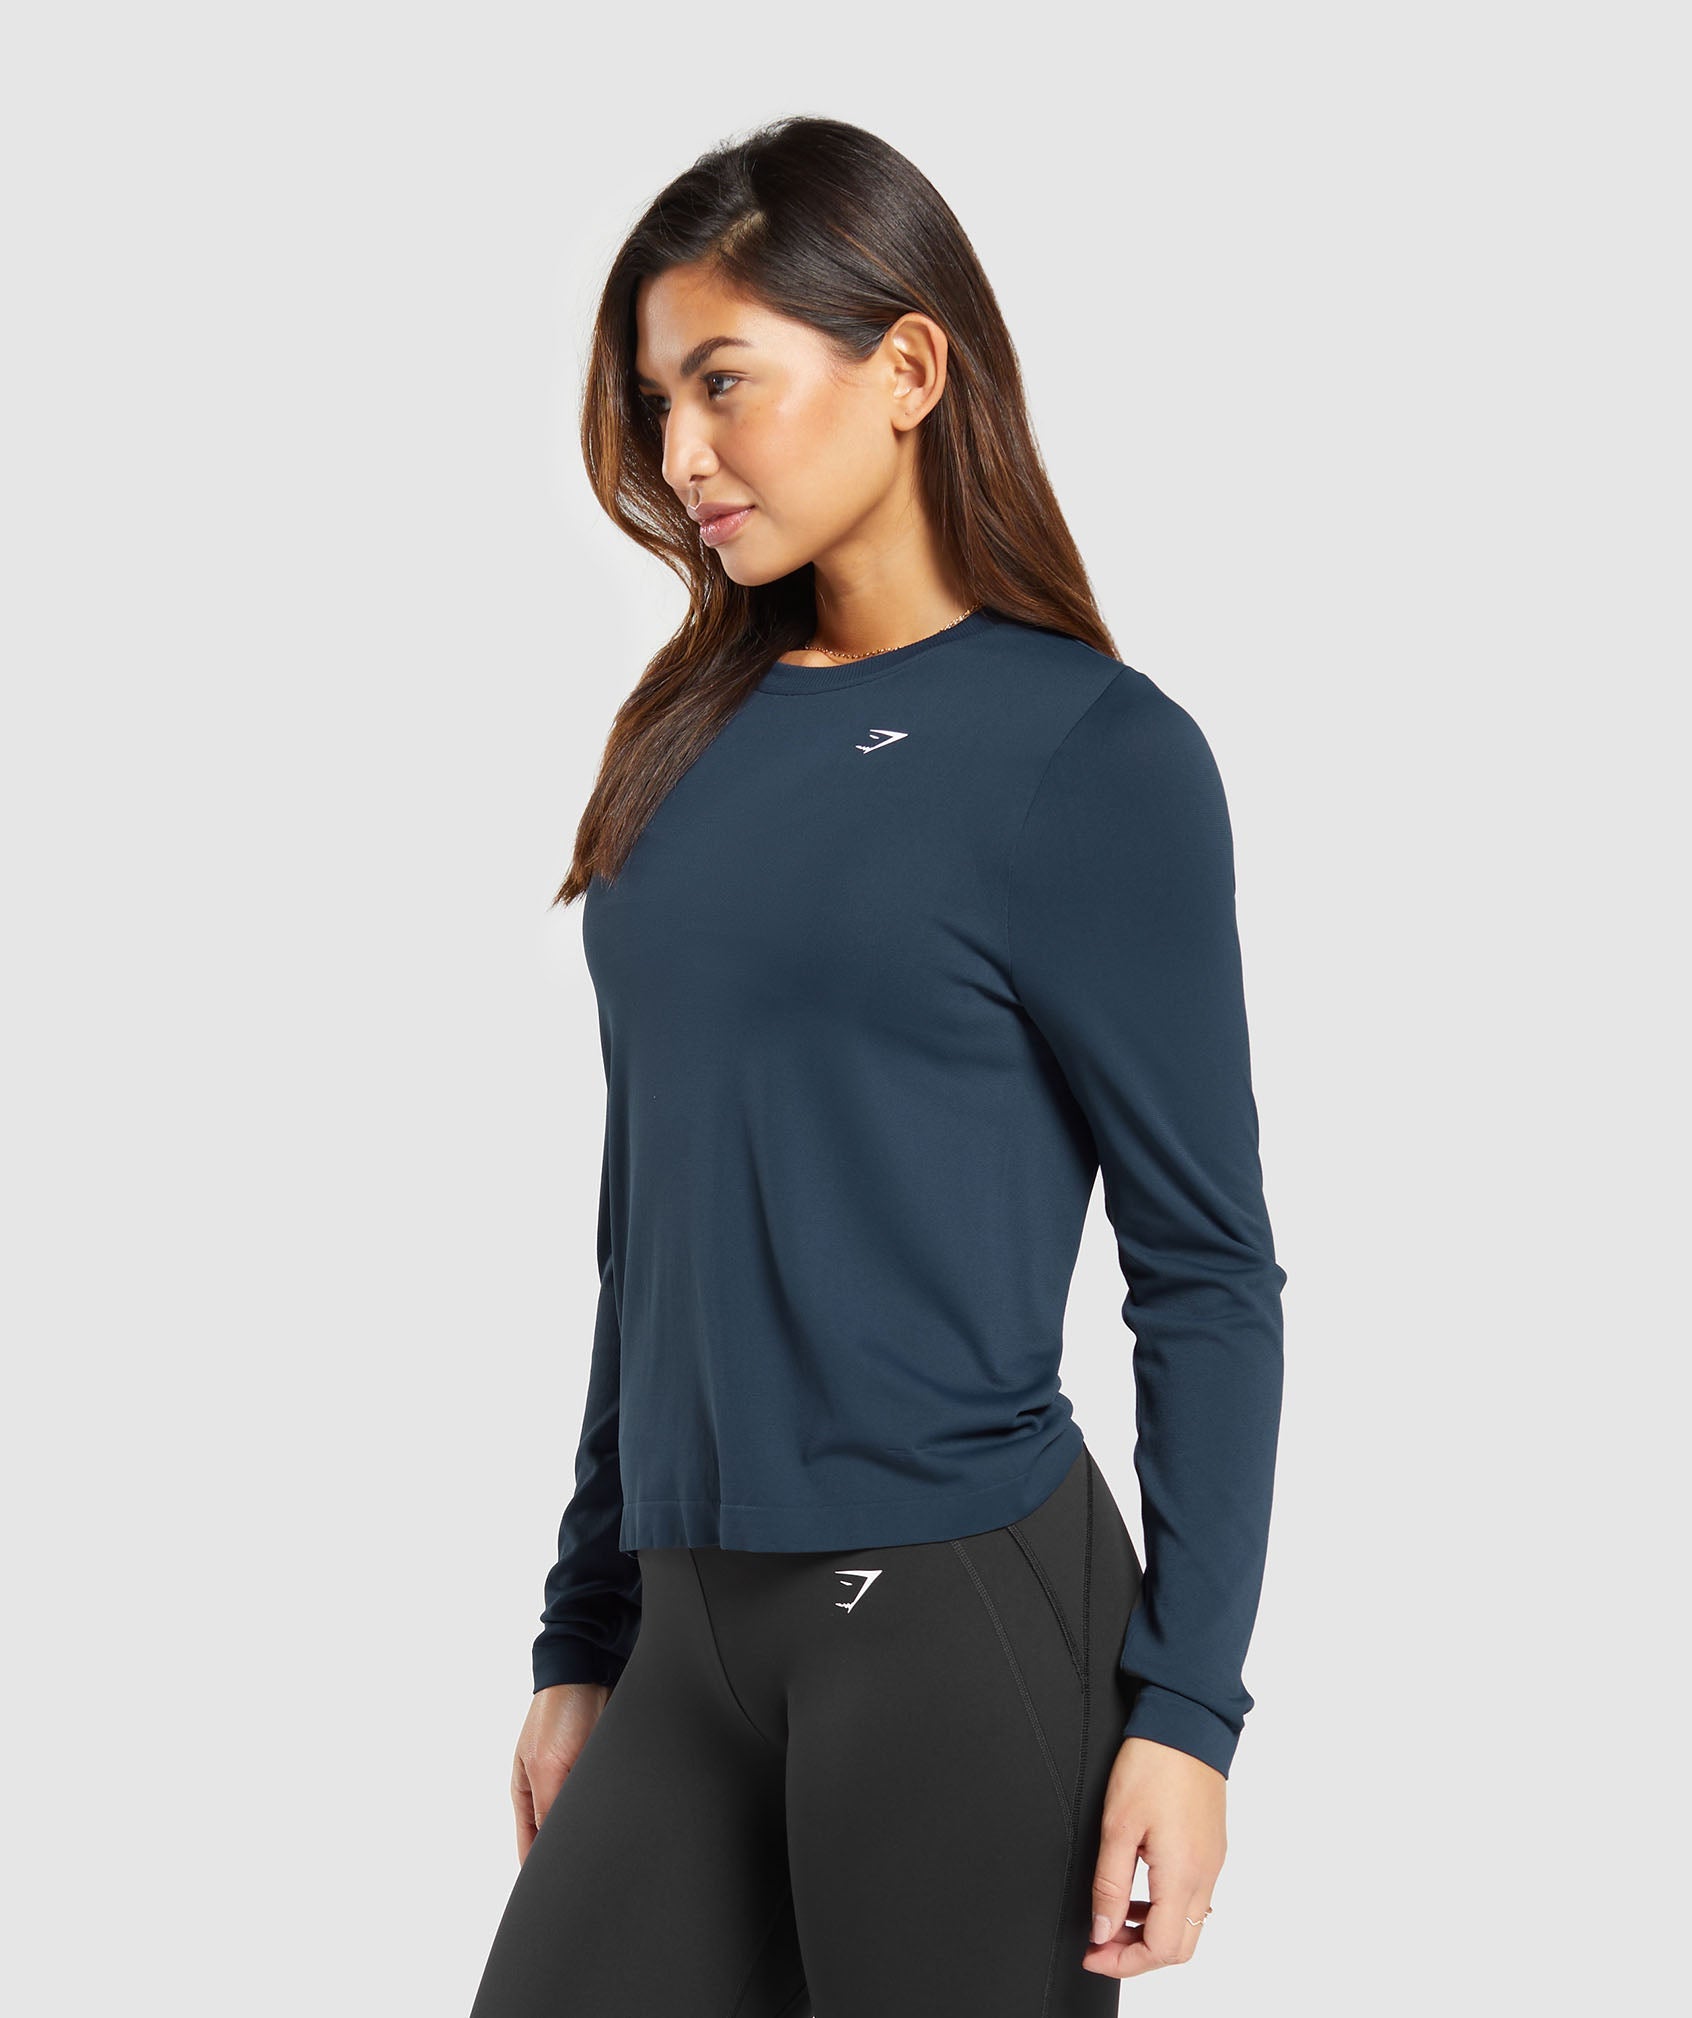 Everyday Seamless Long Sleeve Top in Navy - view 3